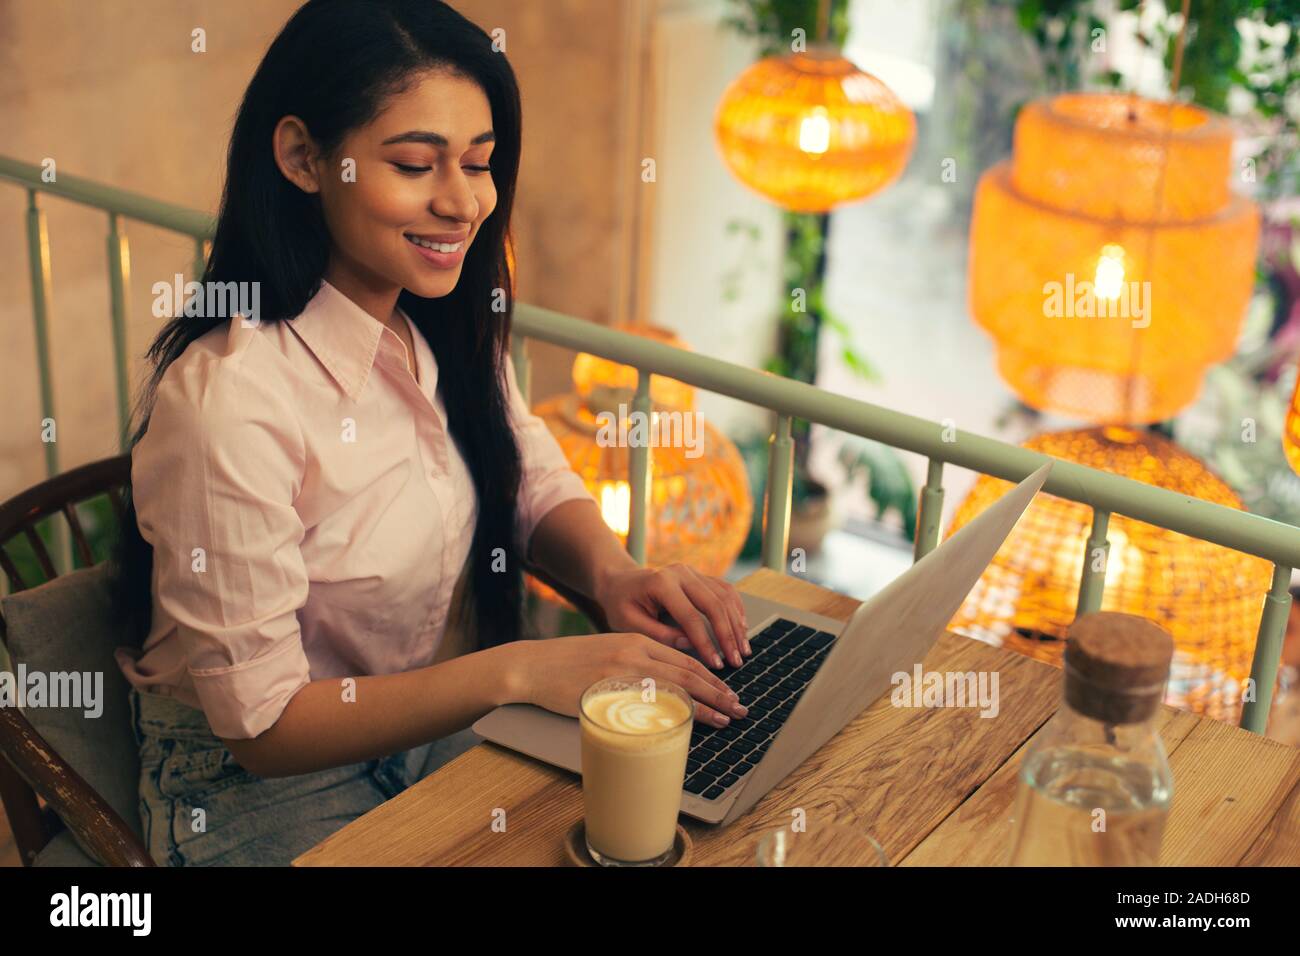 Pleased young woman feeling good while working on her laptop Stock Photo